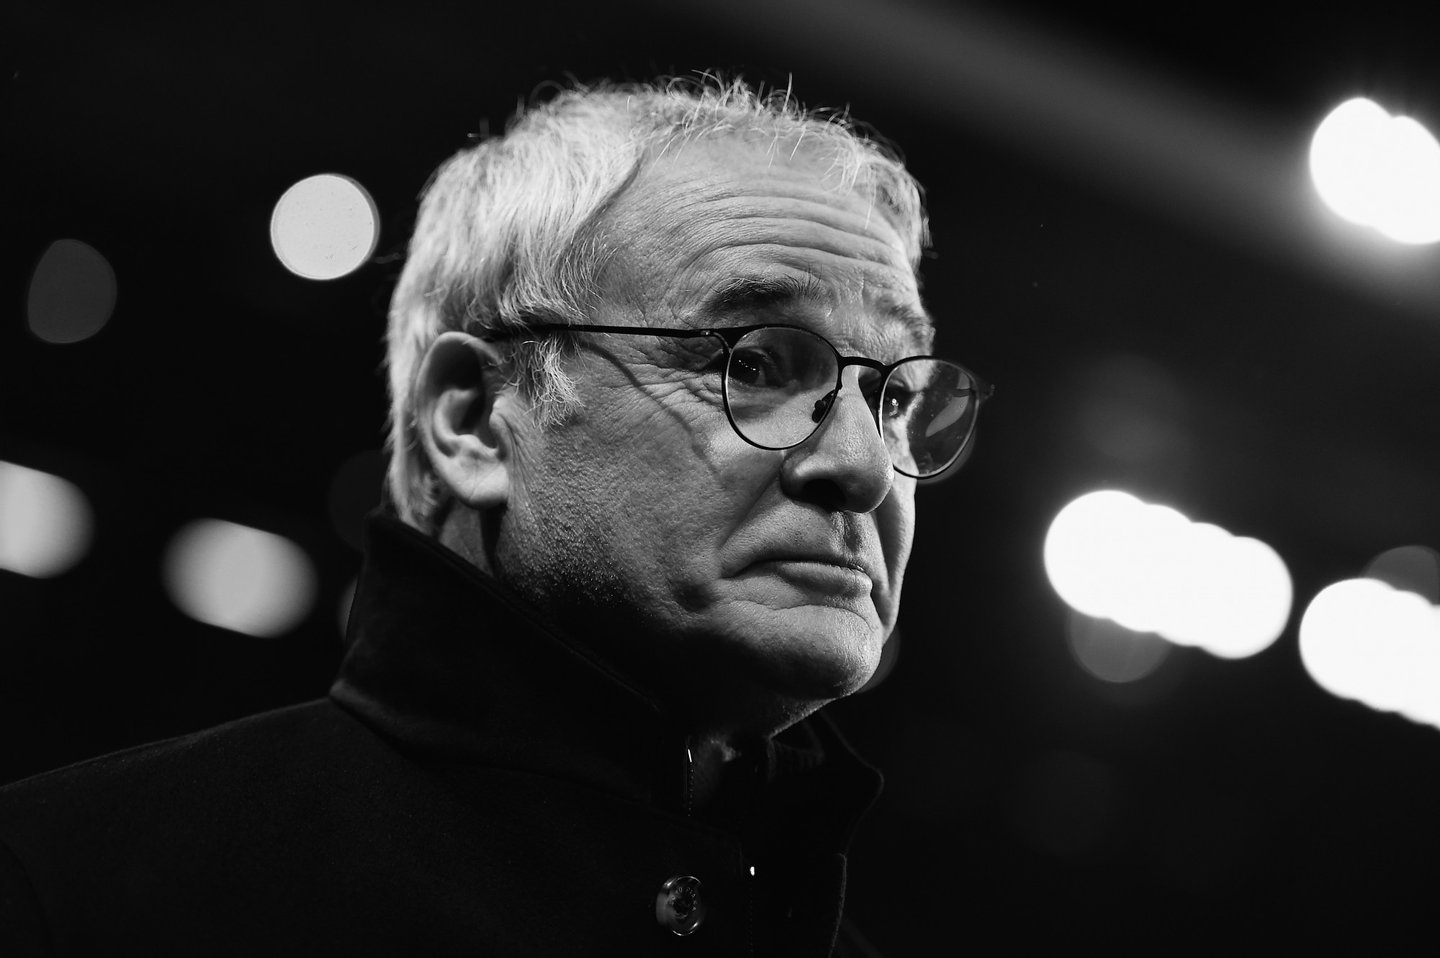 BIRMINGHAM, ENGLAND - JANUARY 16: (Editors notes: This image has been converted to black and white.) Claudio Ranieri of Leicester City looks on during the Barclays Premier League match between Aston Villa and Leicester City at The King Power Stadium on January 16, 2016 in Birmingham, England. (Photo by Laurence Griffiths/Getty Images)